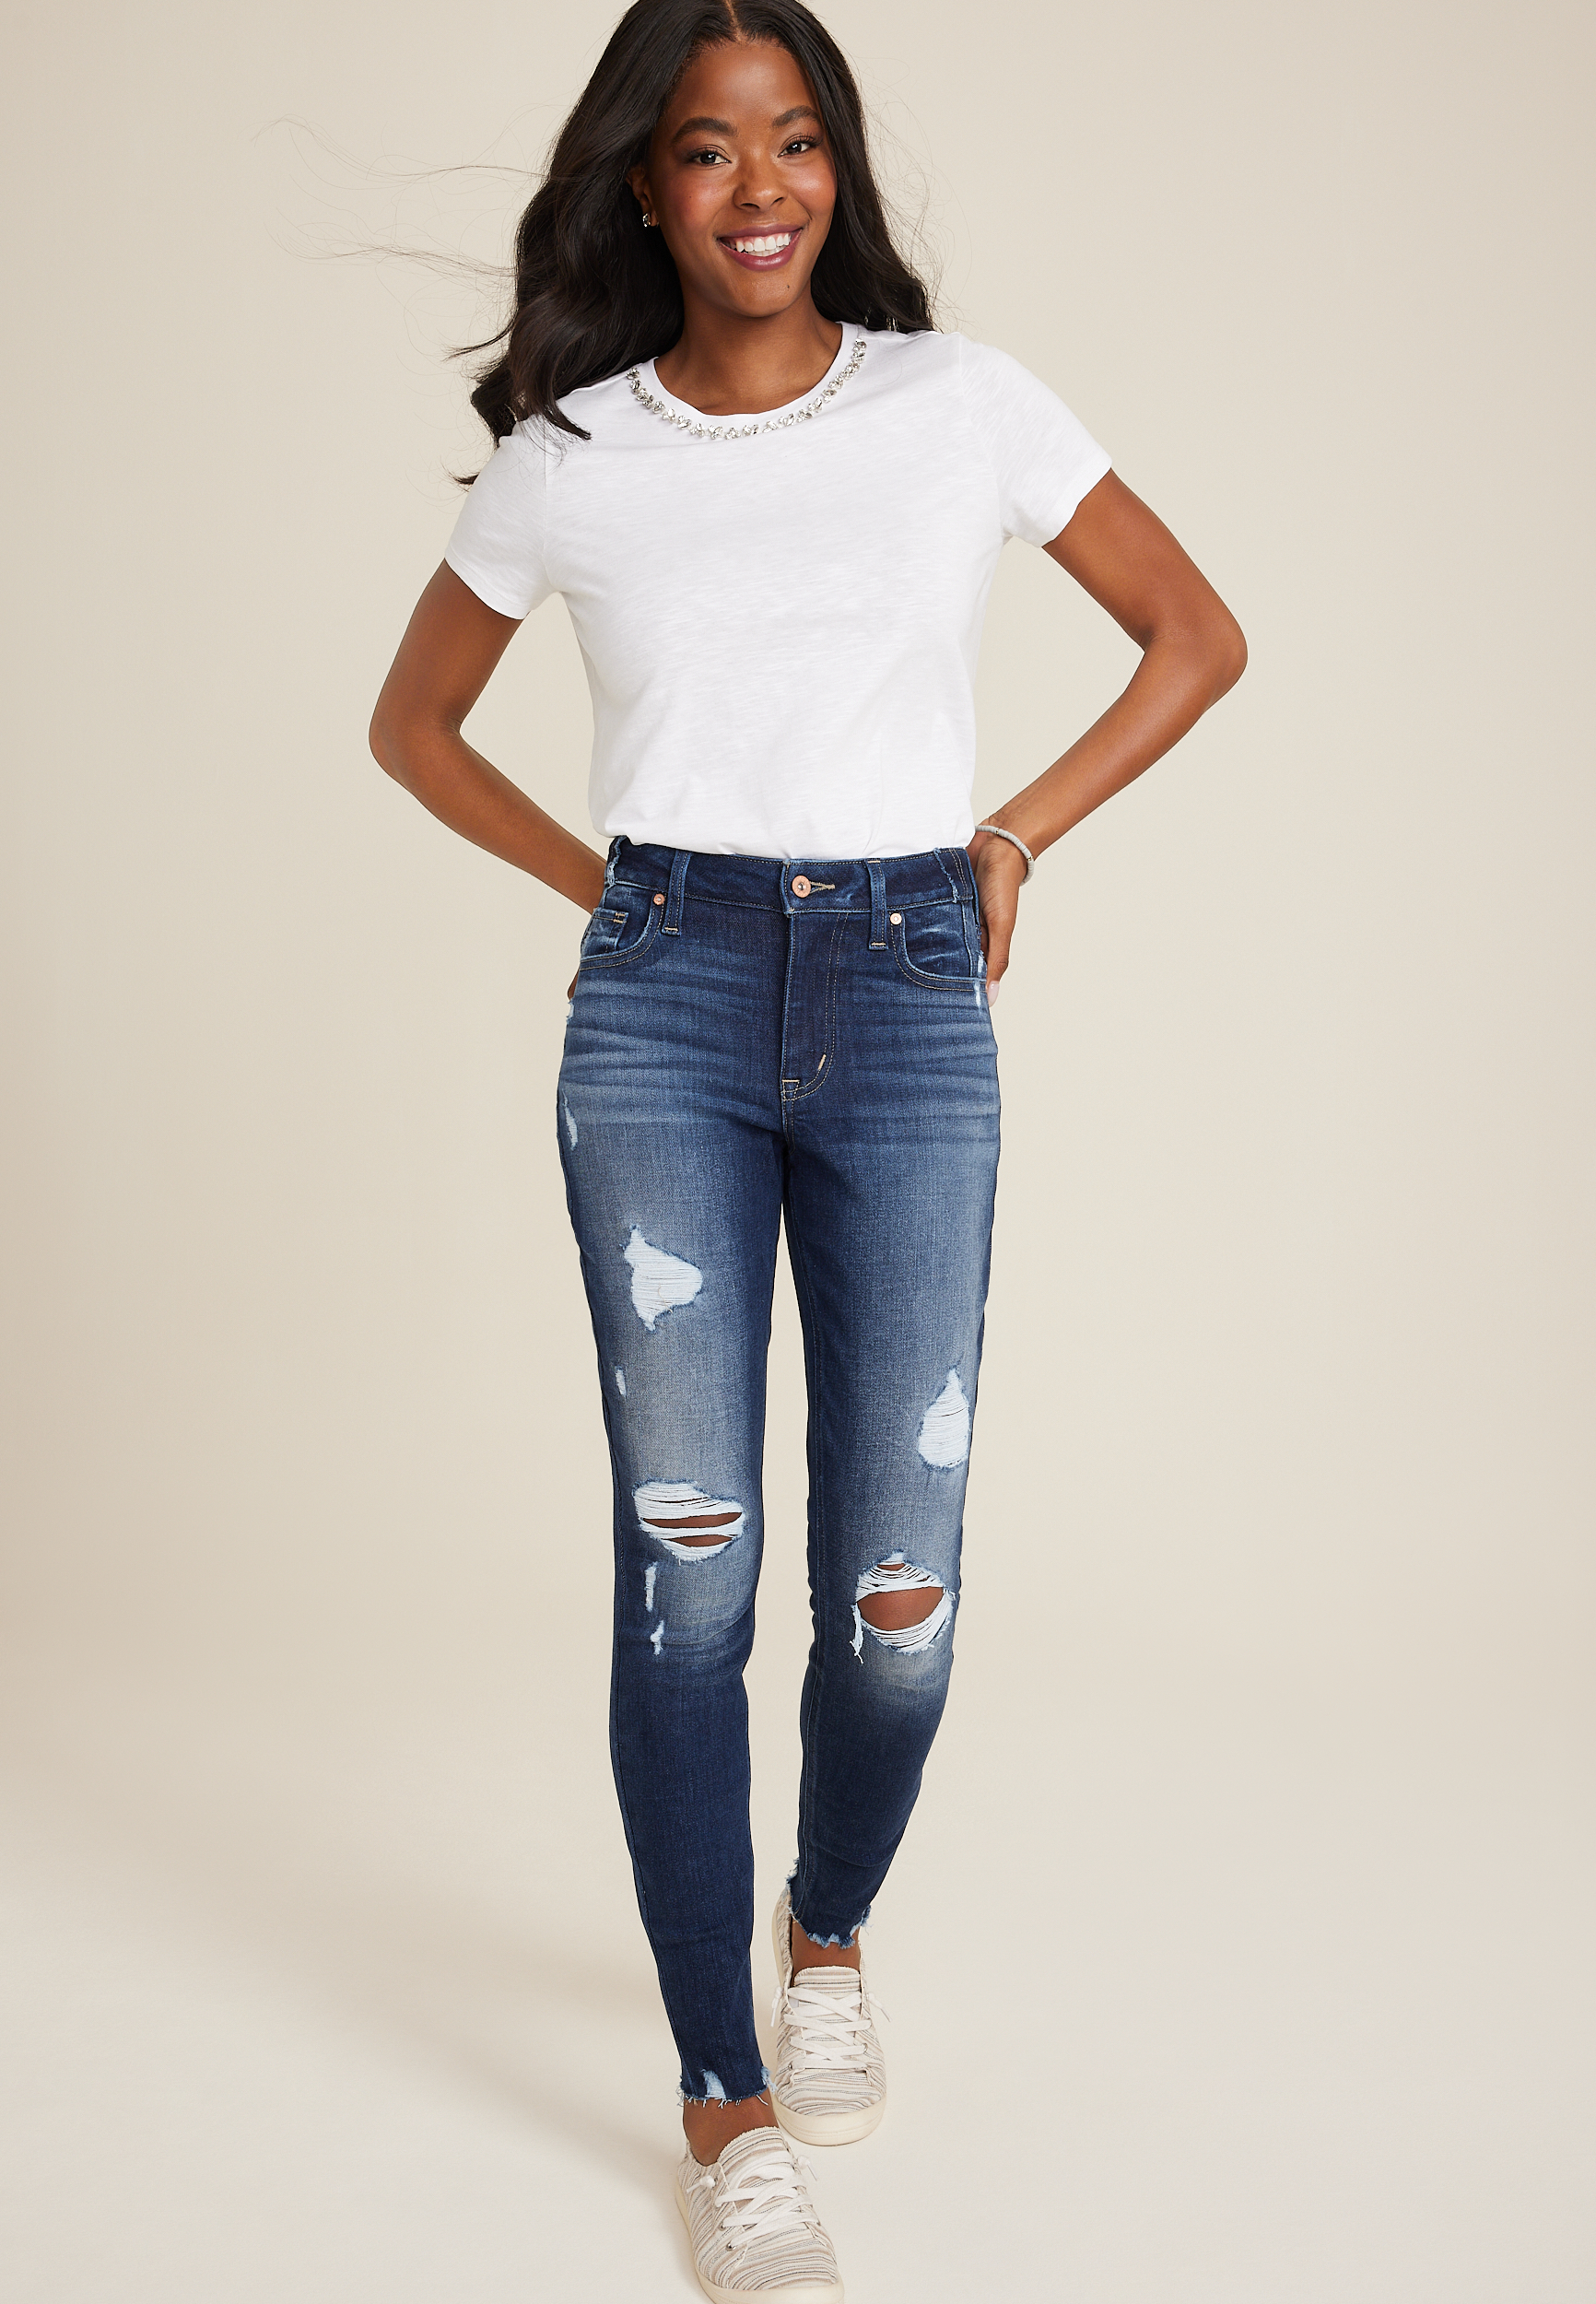 Edgely™ Jeans, Shop Edgy Jeans For Women